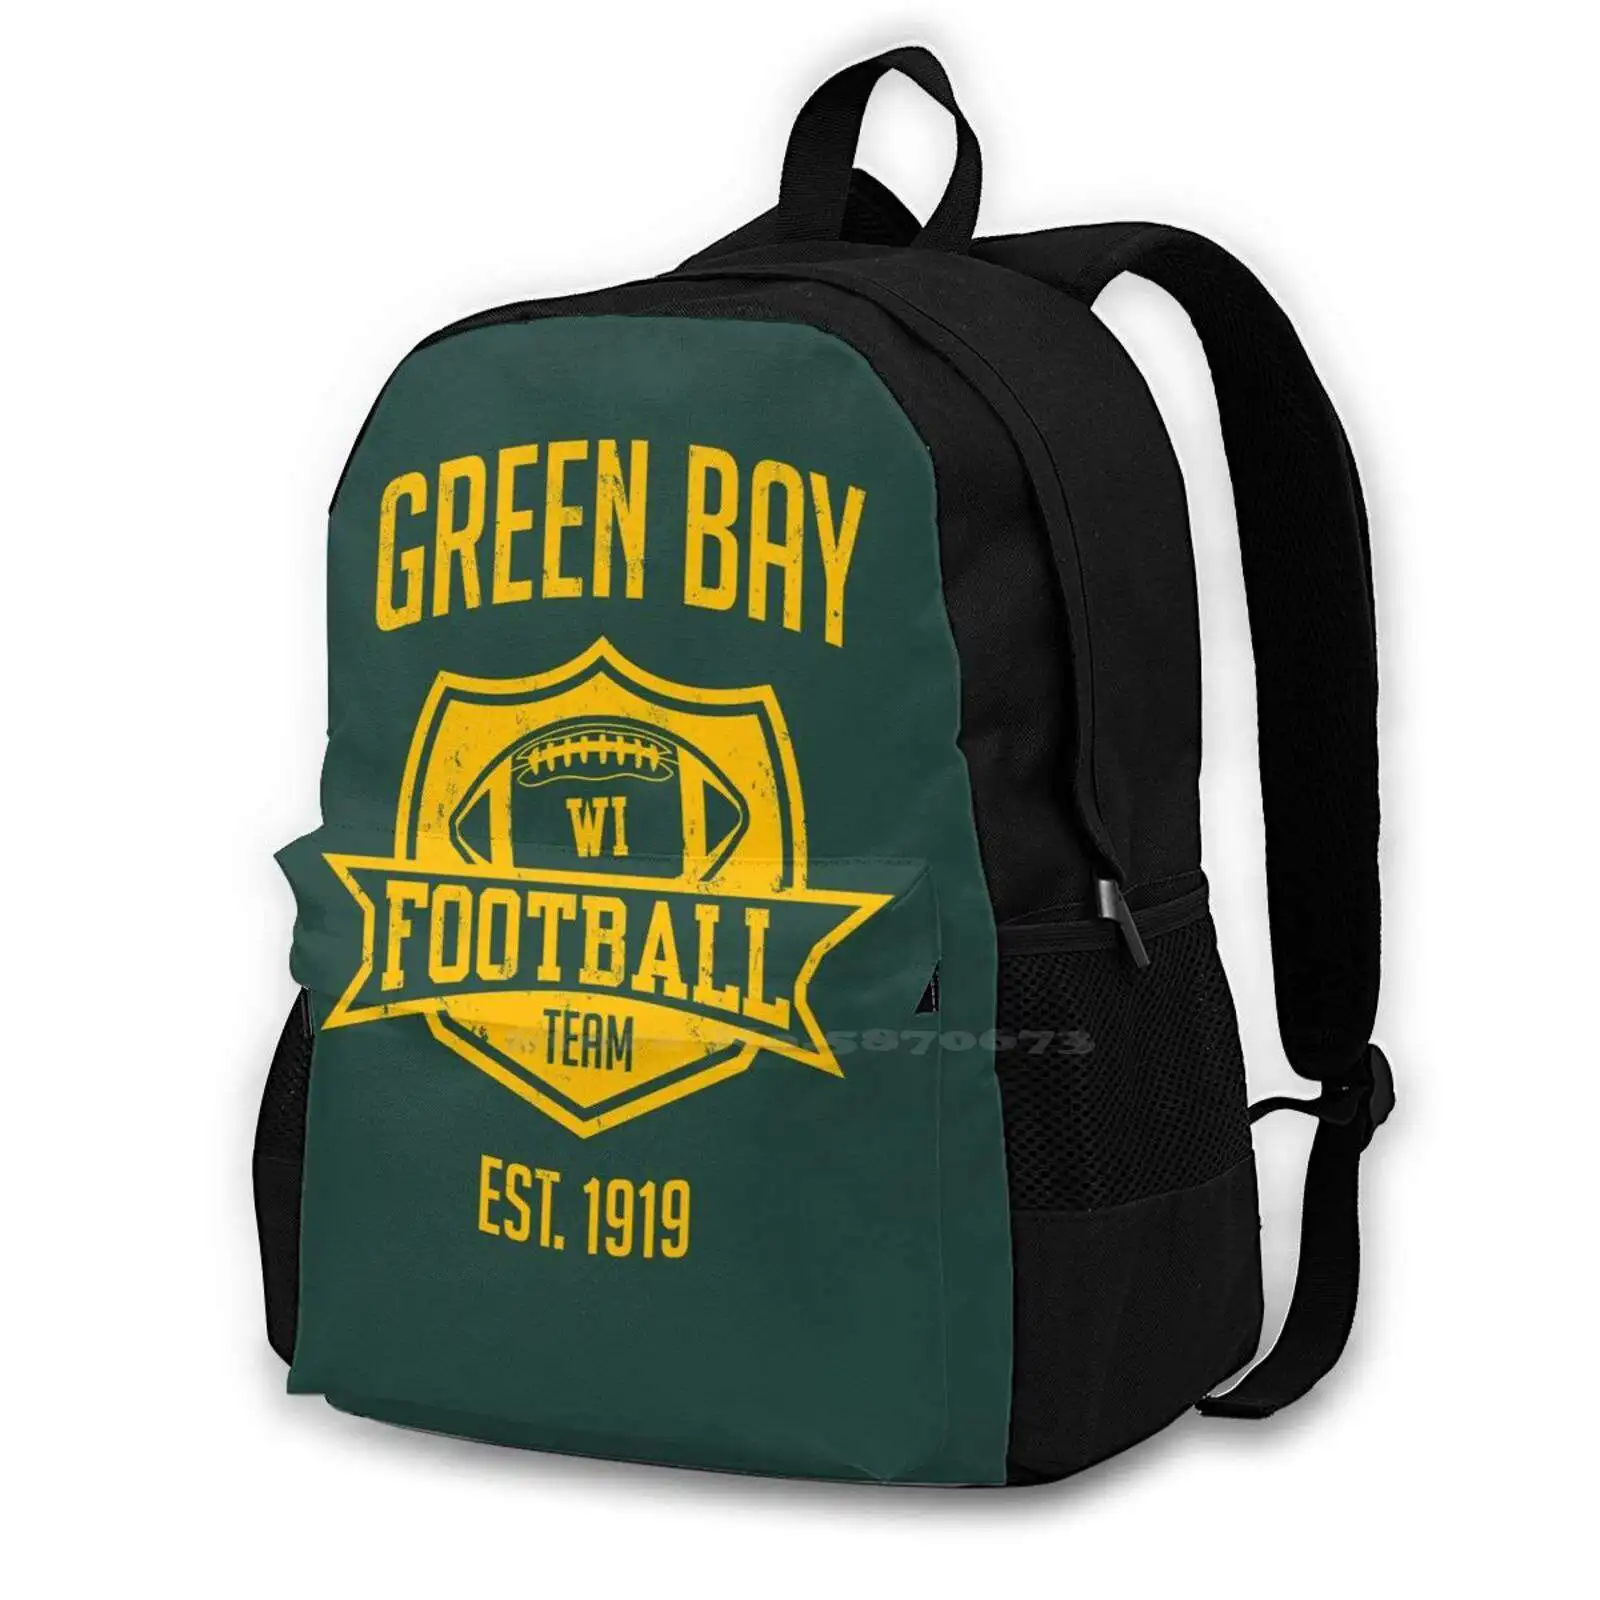 

Vintage Packer Football Team Green Bay Wisconsin Distressed Retro Look Party Tailgate Sunday Backpacks For Men Women Teenagers